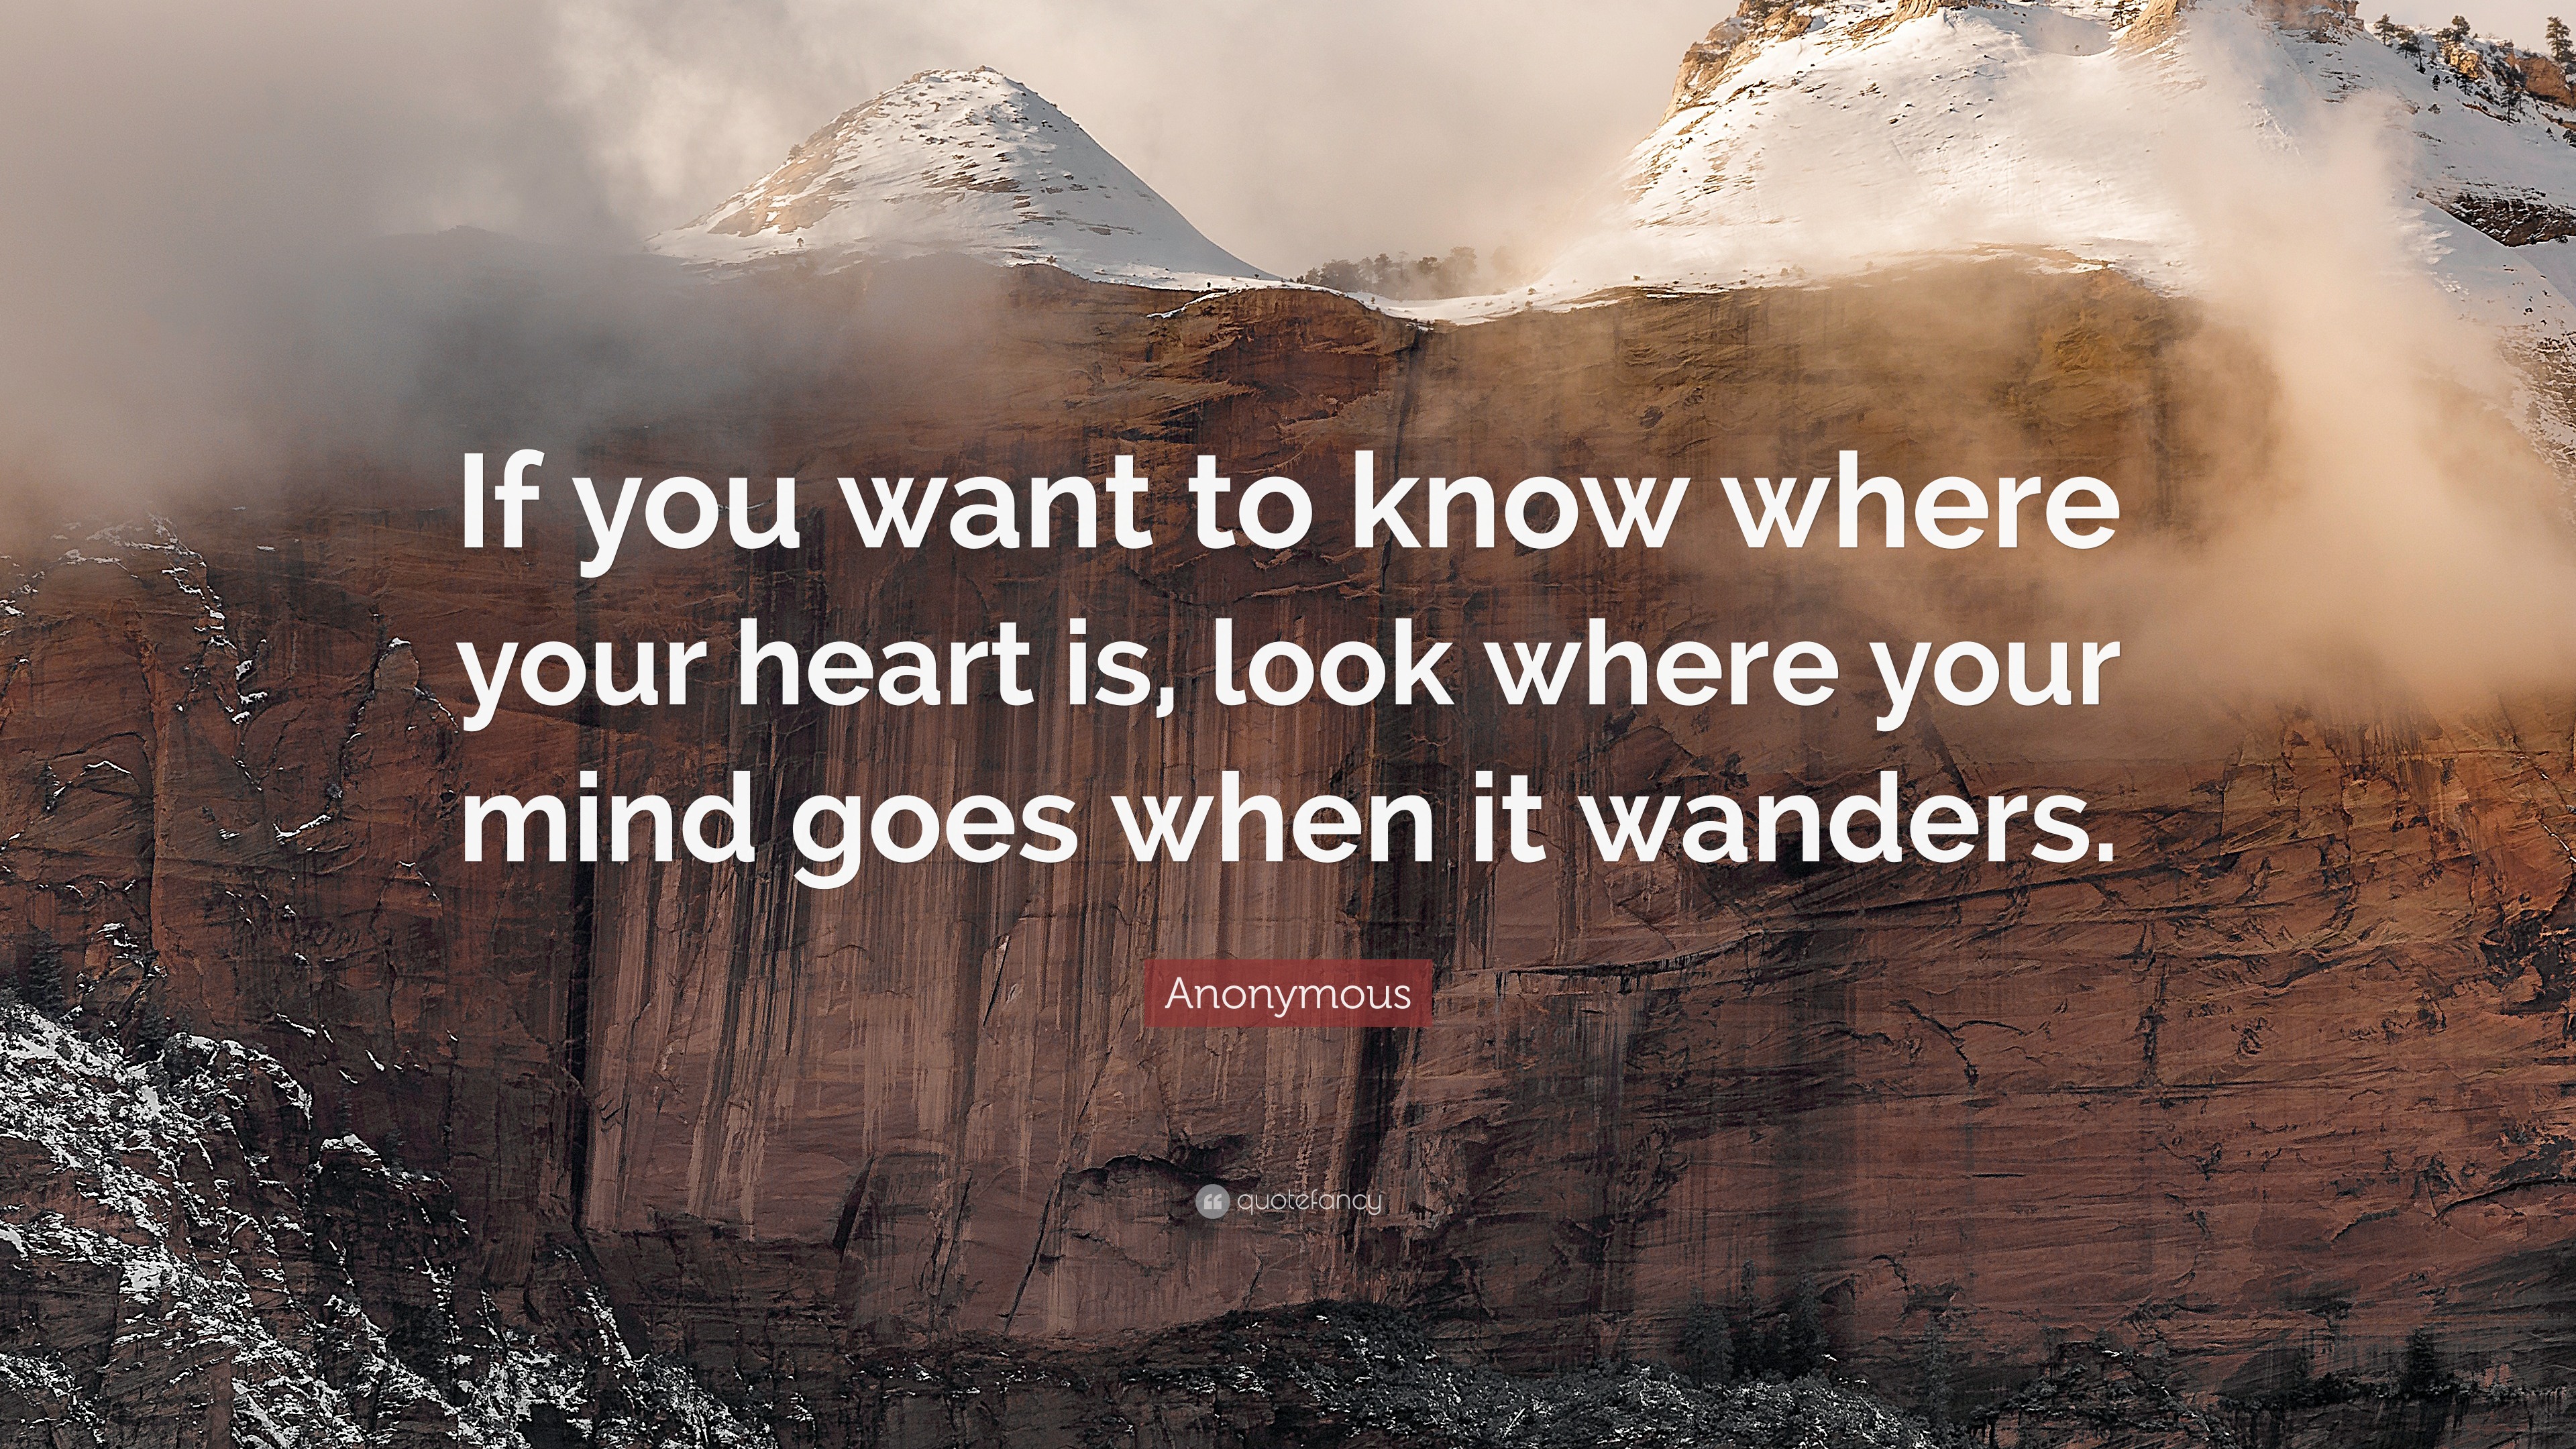 Anonymous Quote: “If You Want To Know Where Your Heart Is, Look Where Your Mind Goes